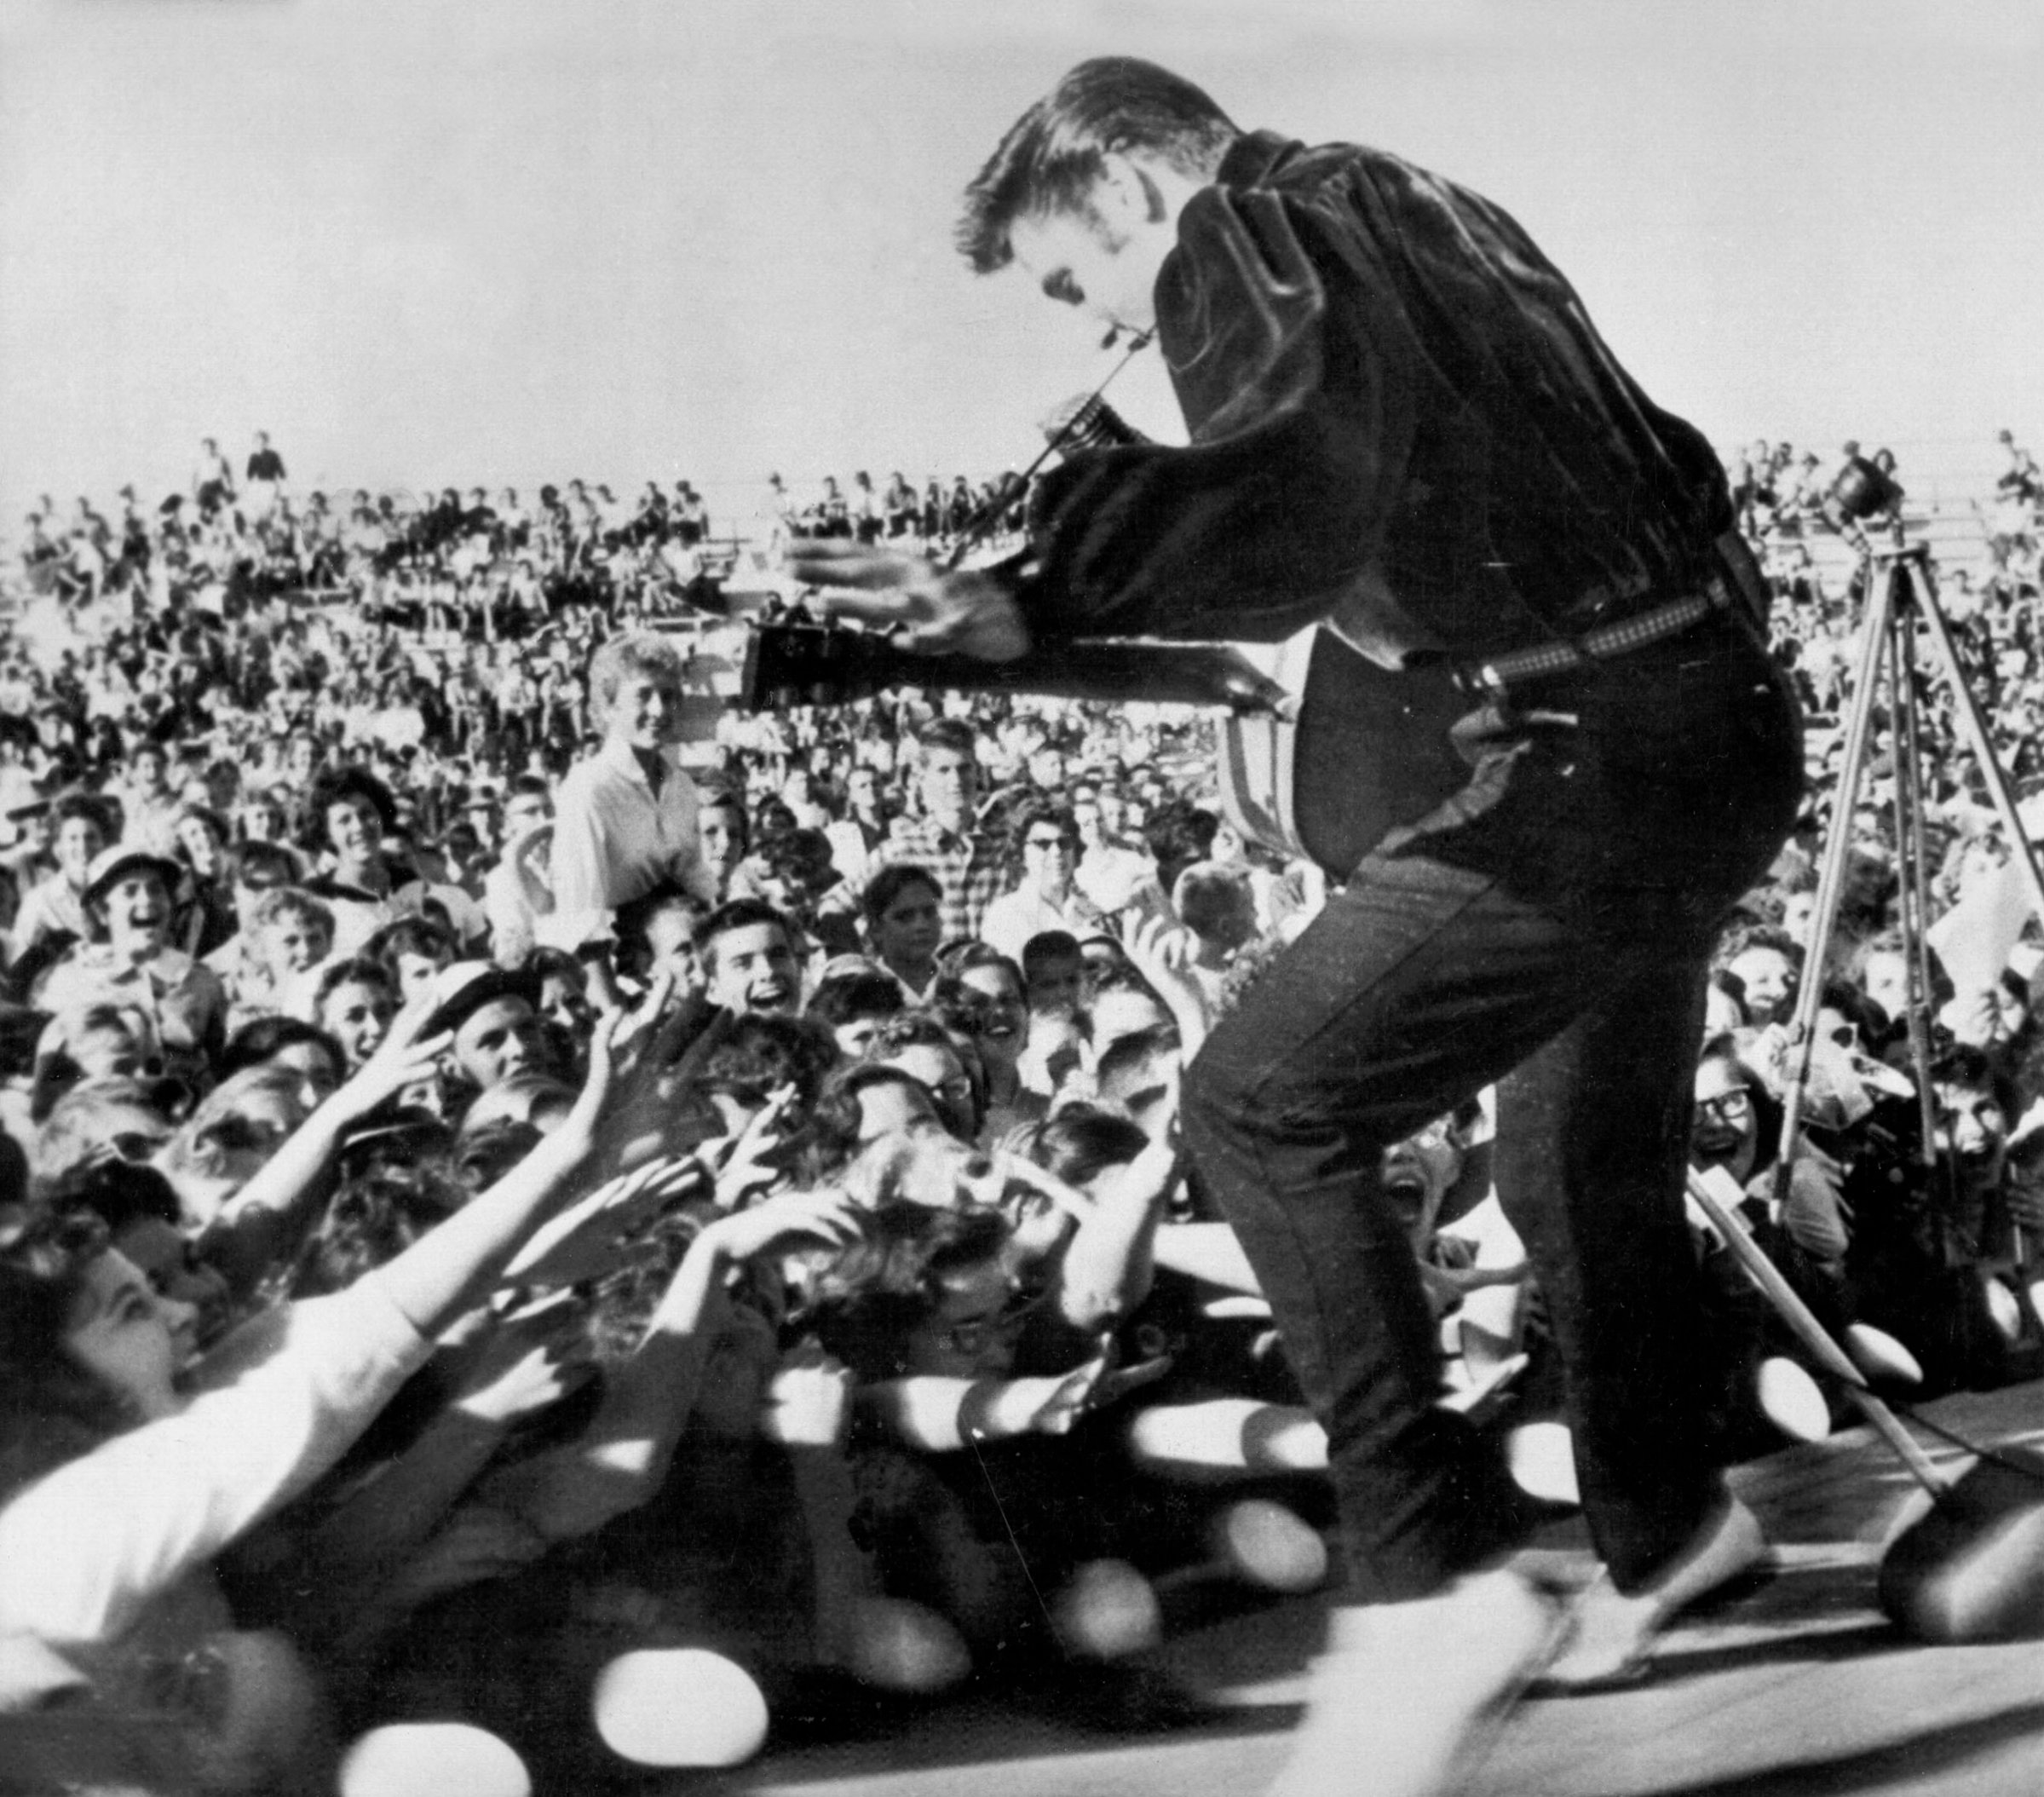 Elvis performs outside to adoring fans on September 26, 1956 in his hometown of Tupelo, Mississippi.